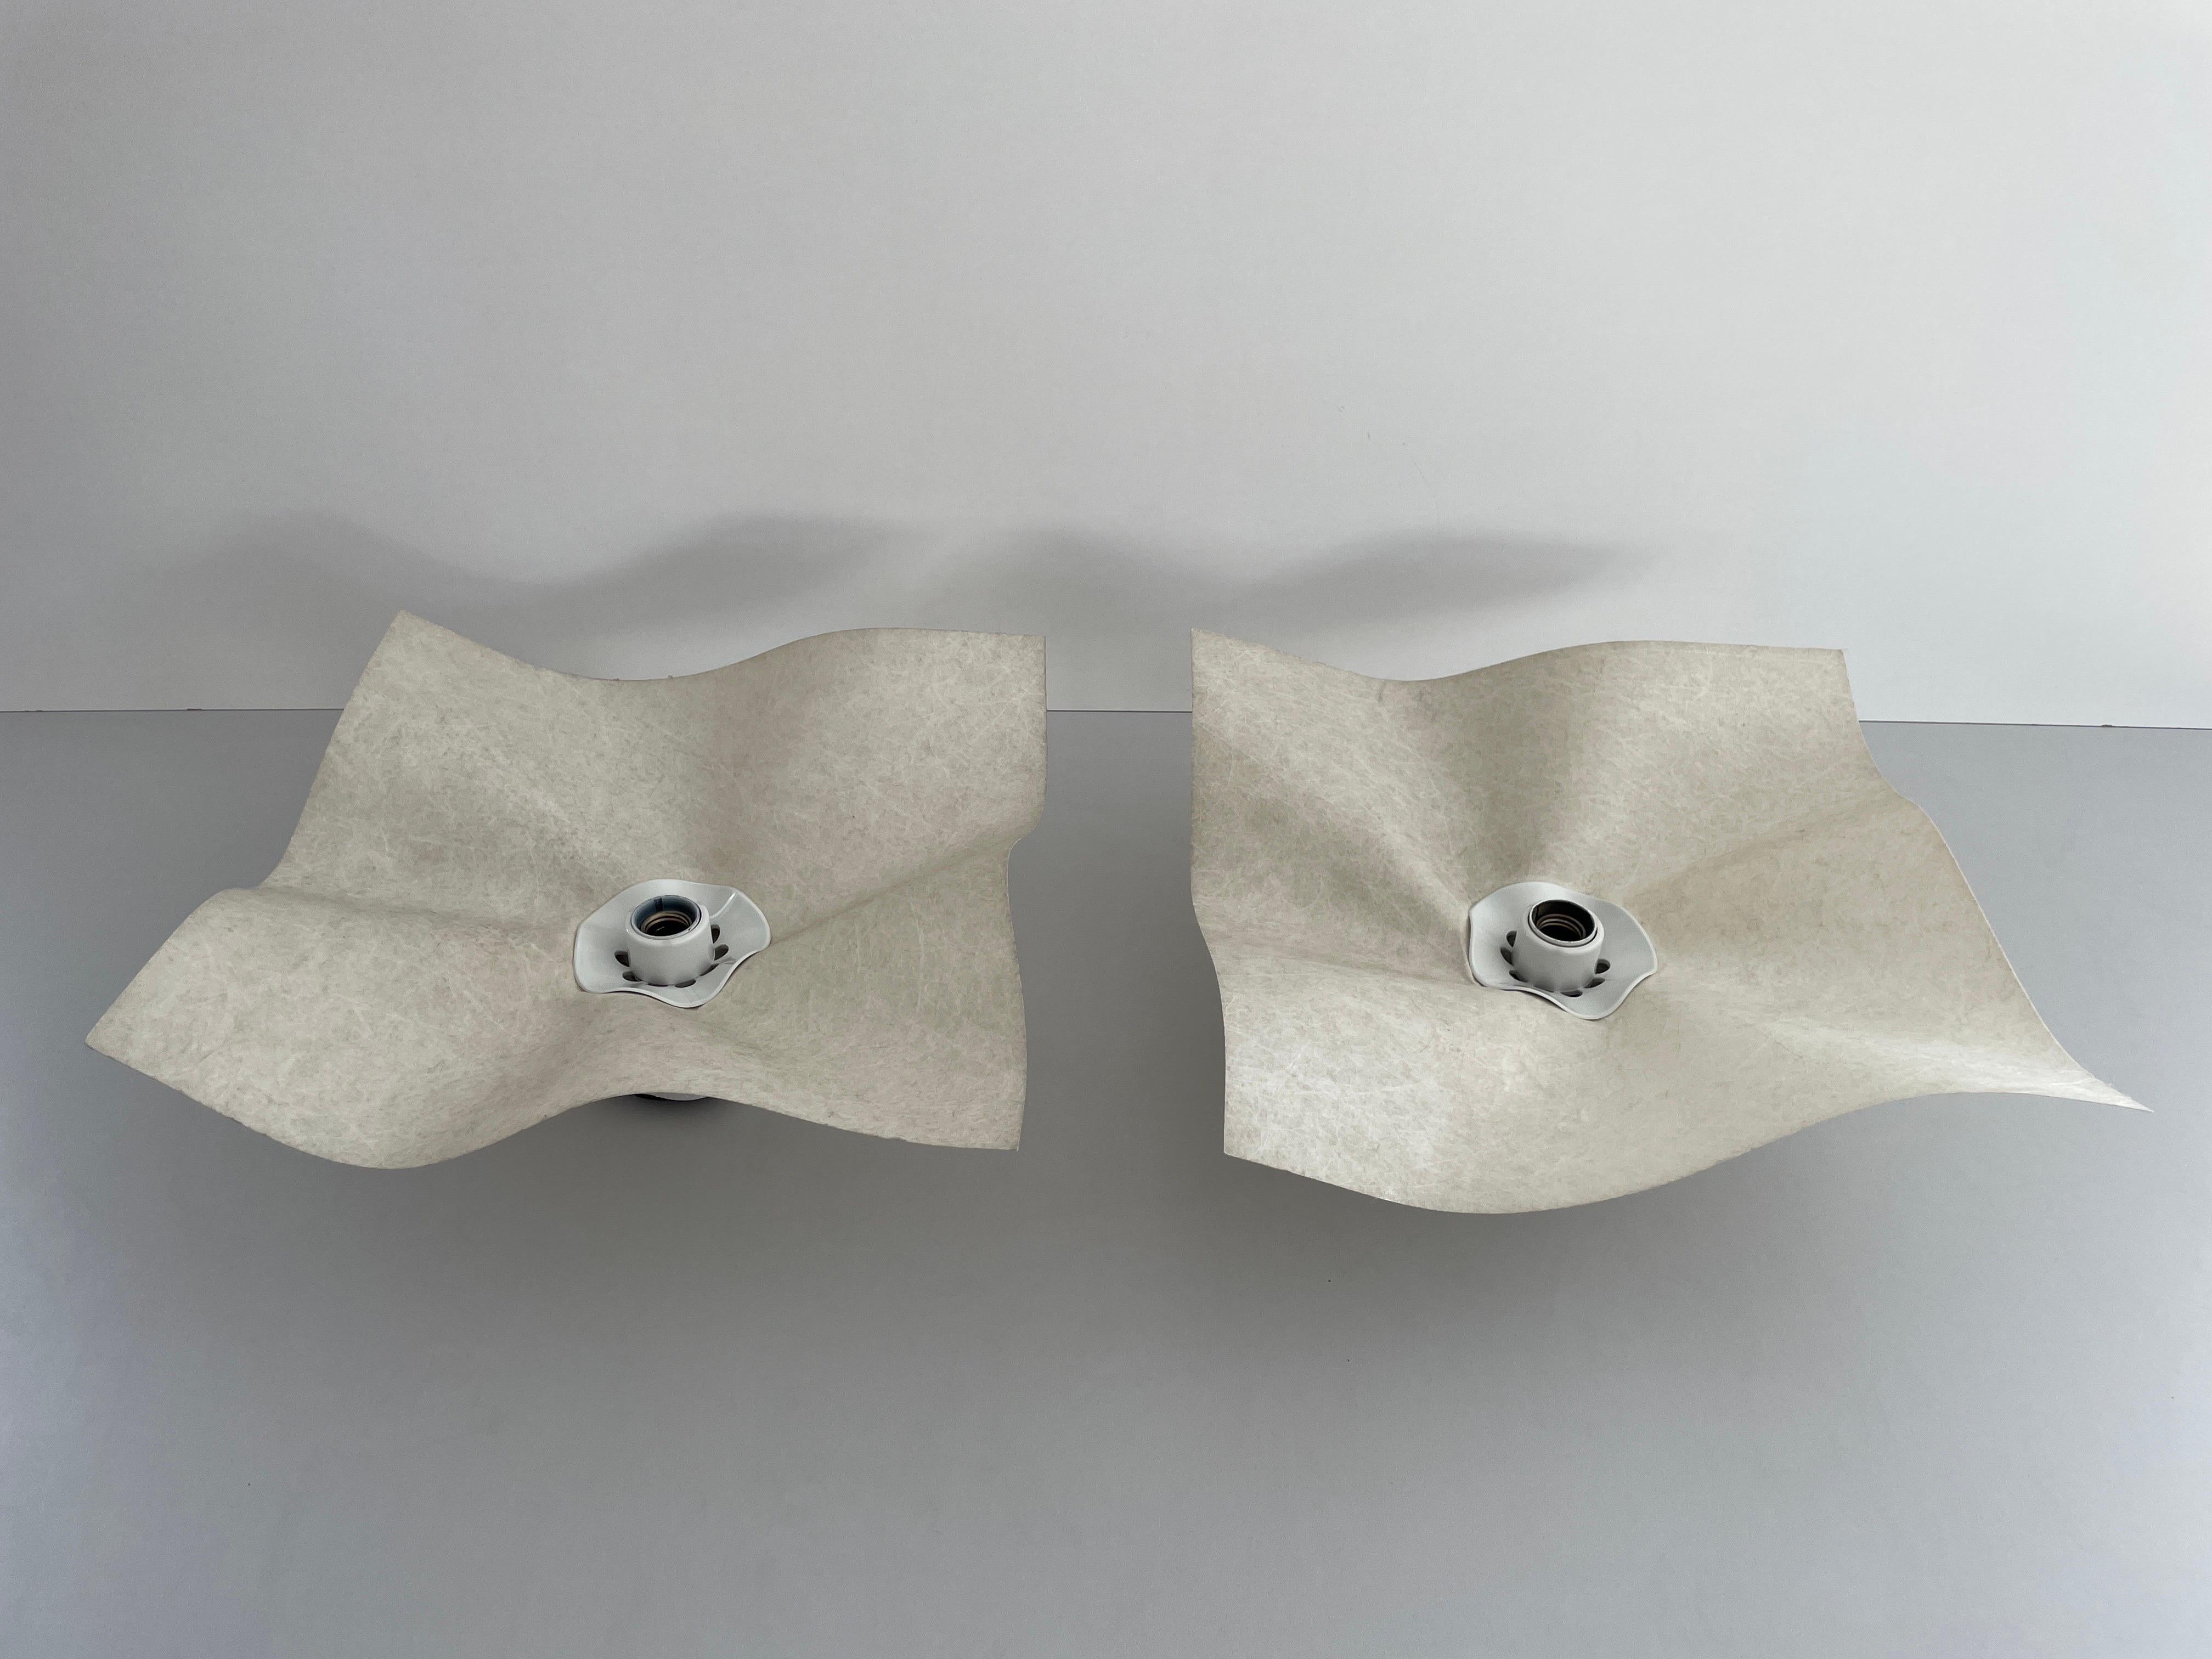 Italian Pair of Sconces or Ceiling Lamps by Mario Bellini for Artemide, 1970s, Italy For Sale